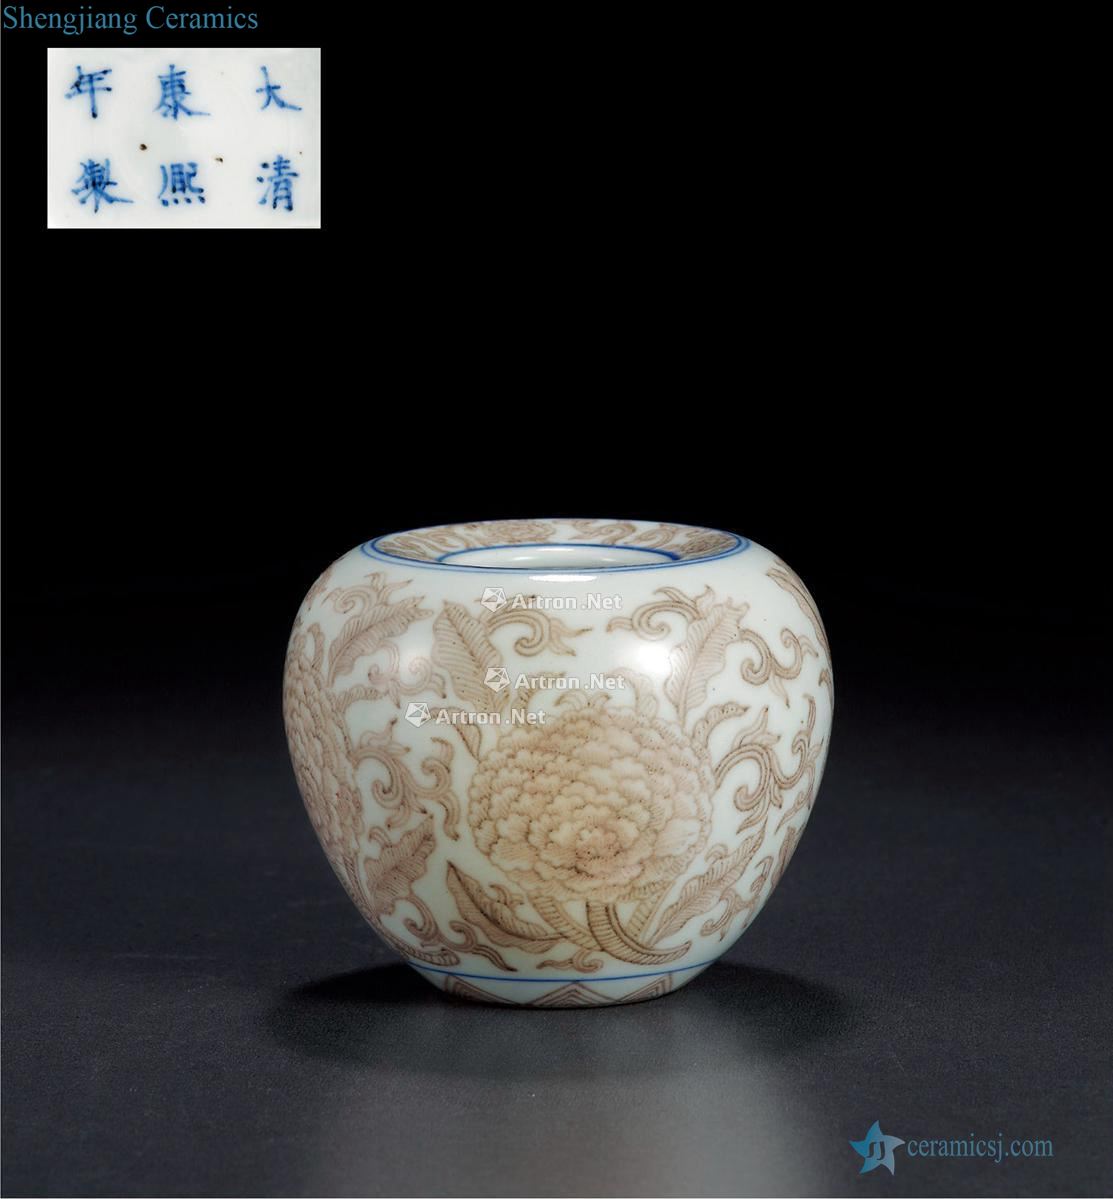 Qing dynasty, the qing emperor kangxi years with blue and white peony grains youligong tangled branches apple